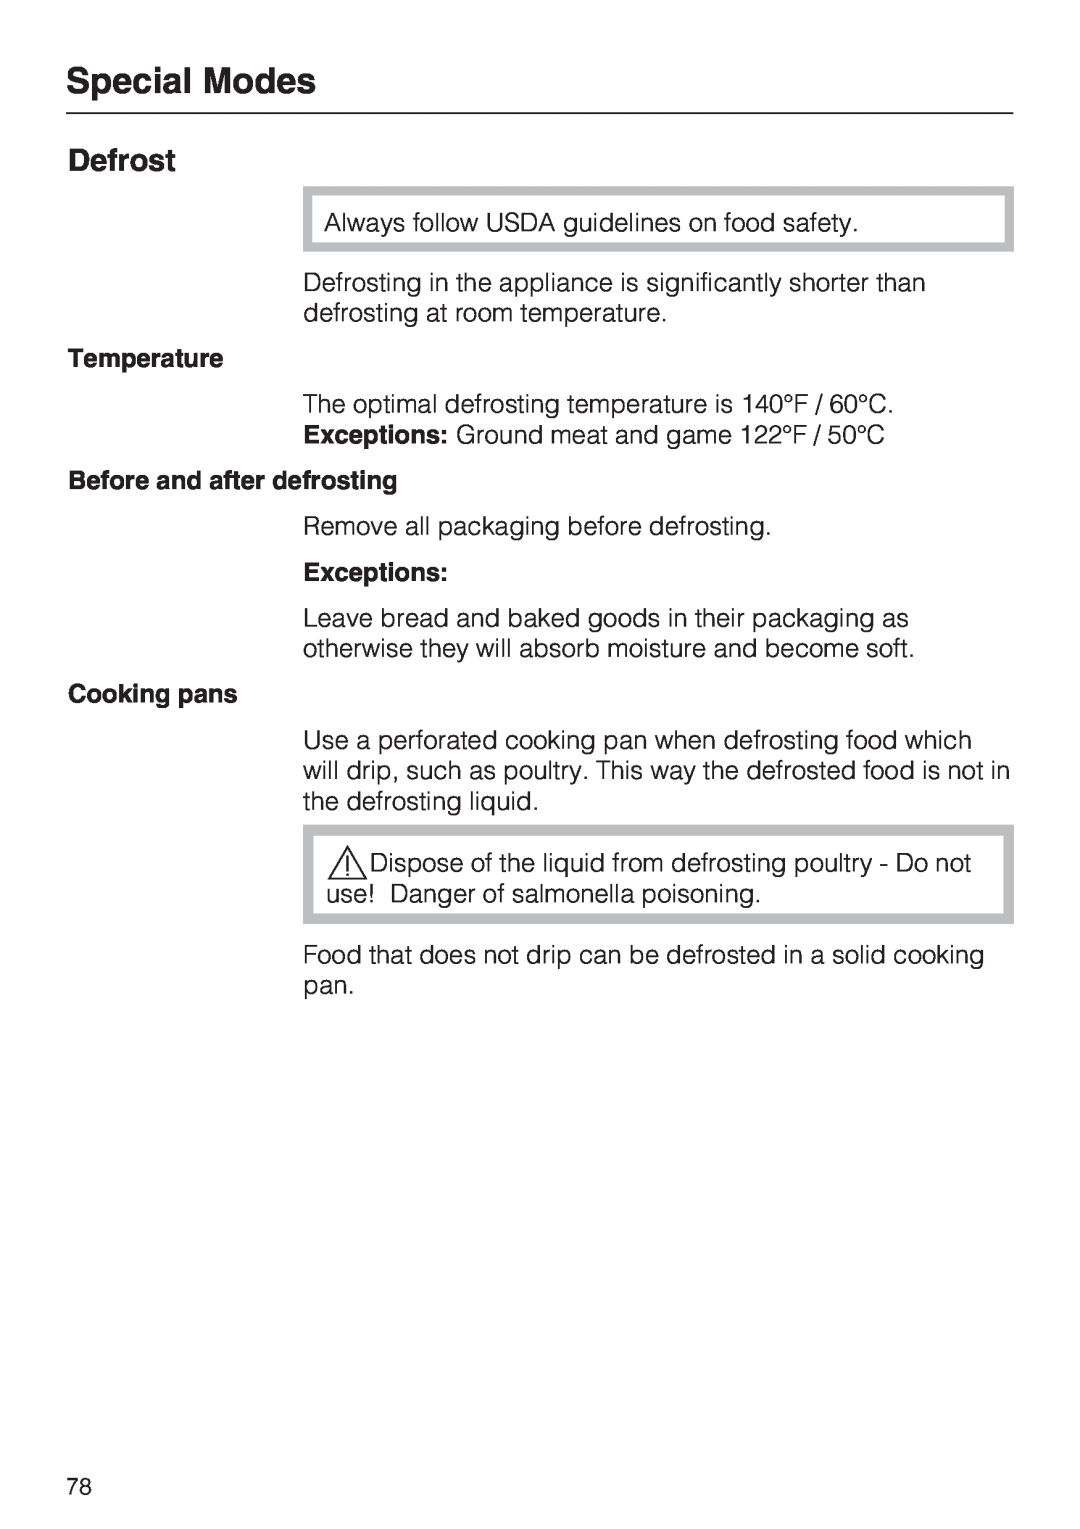 Miele 09 855 050 Special Modes, Defrost, Temperature, Before and after defrosting, Exceptions, Cooking pans 